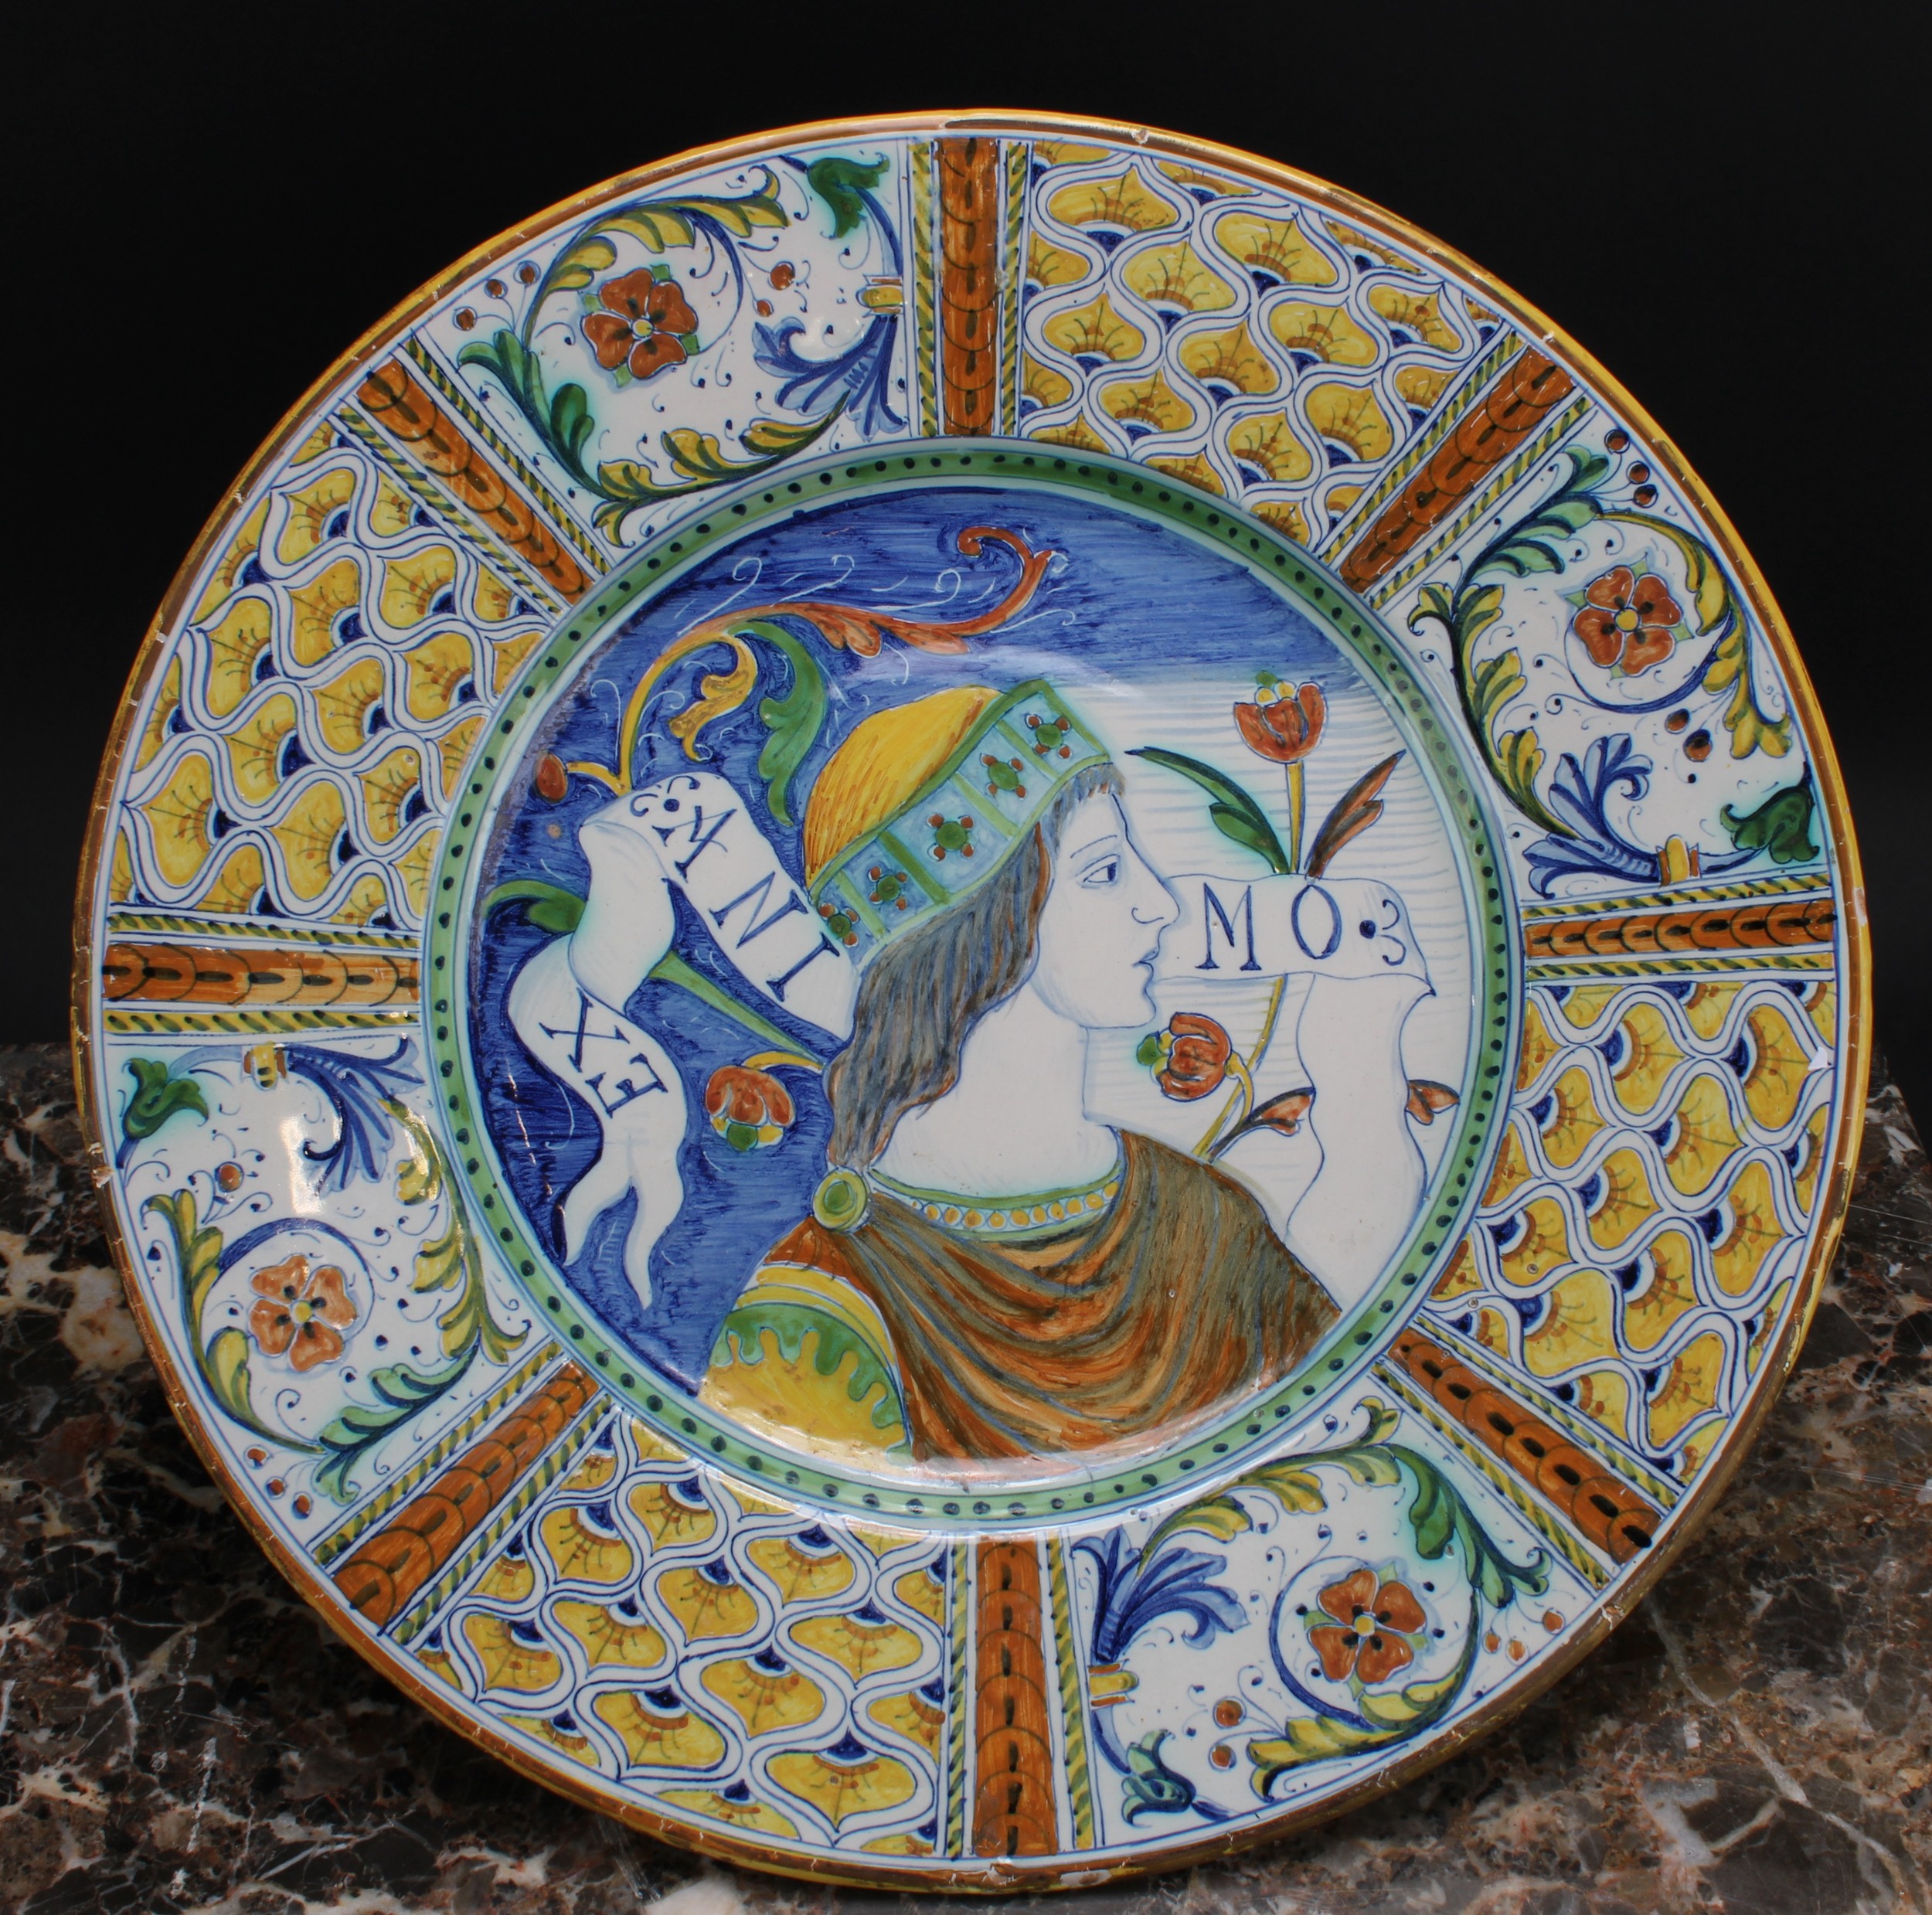 An Italian maiolica circular charger, painted in the Renaissance taste with a bust-length portrait